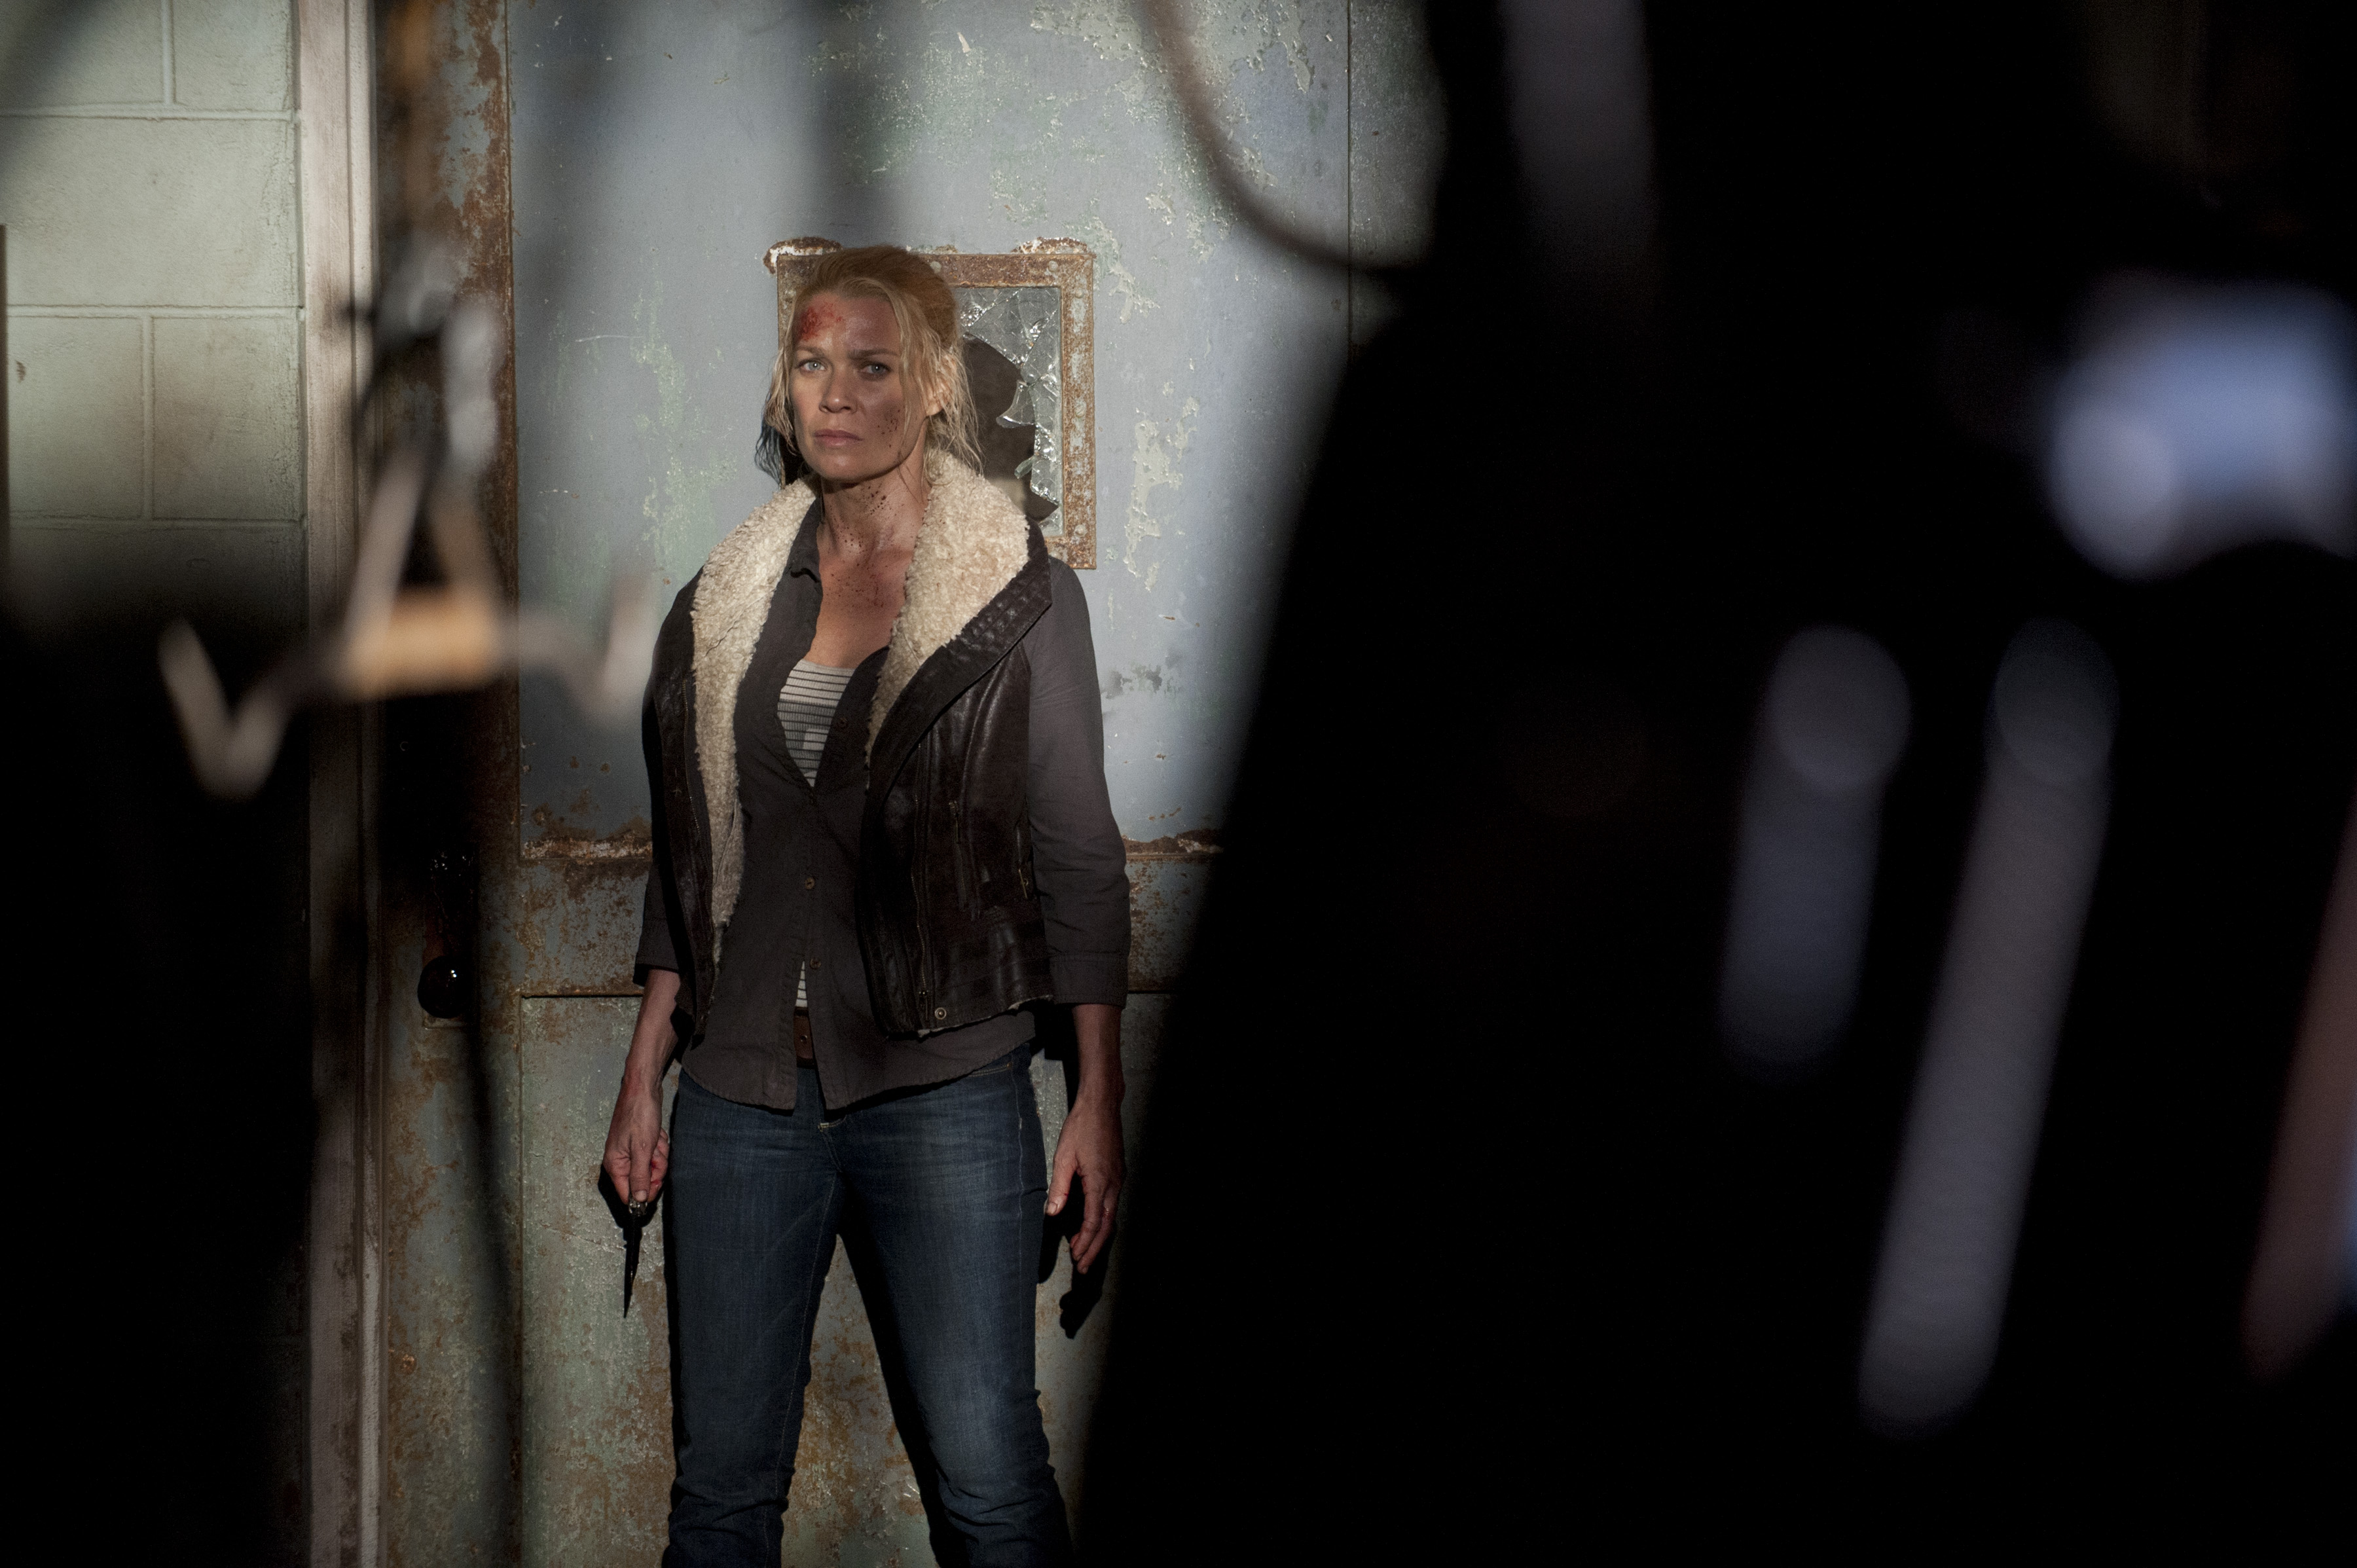 tv show, the walking dead, andrea (the walking dead), laurie holden